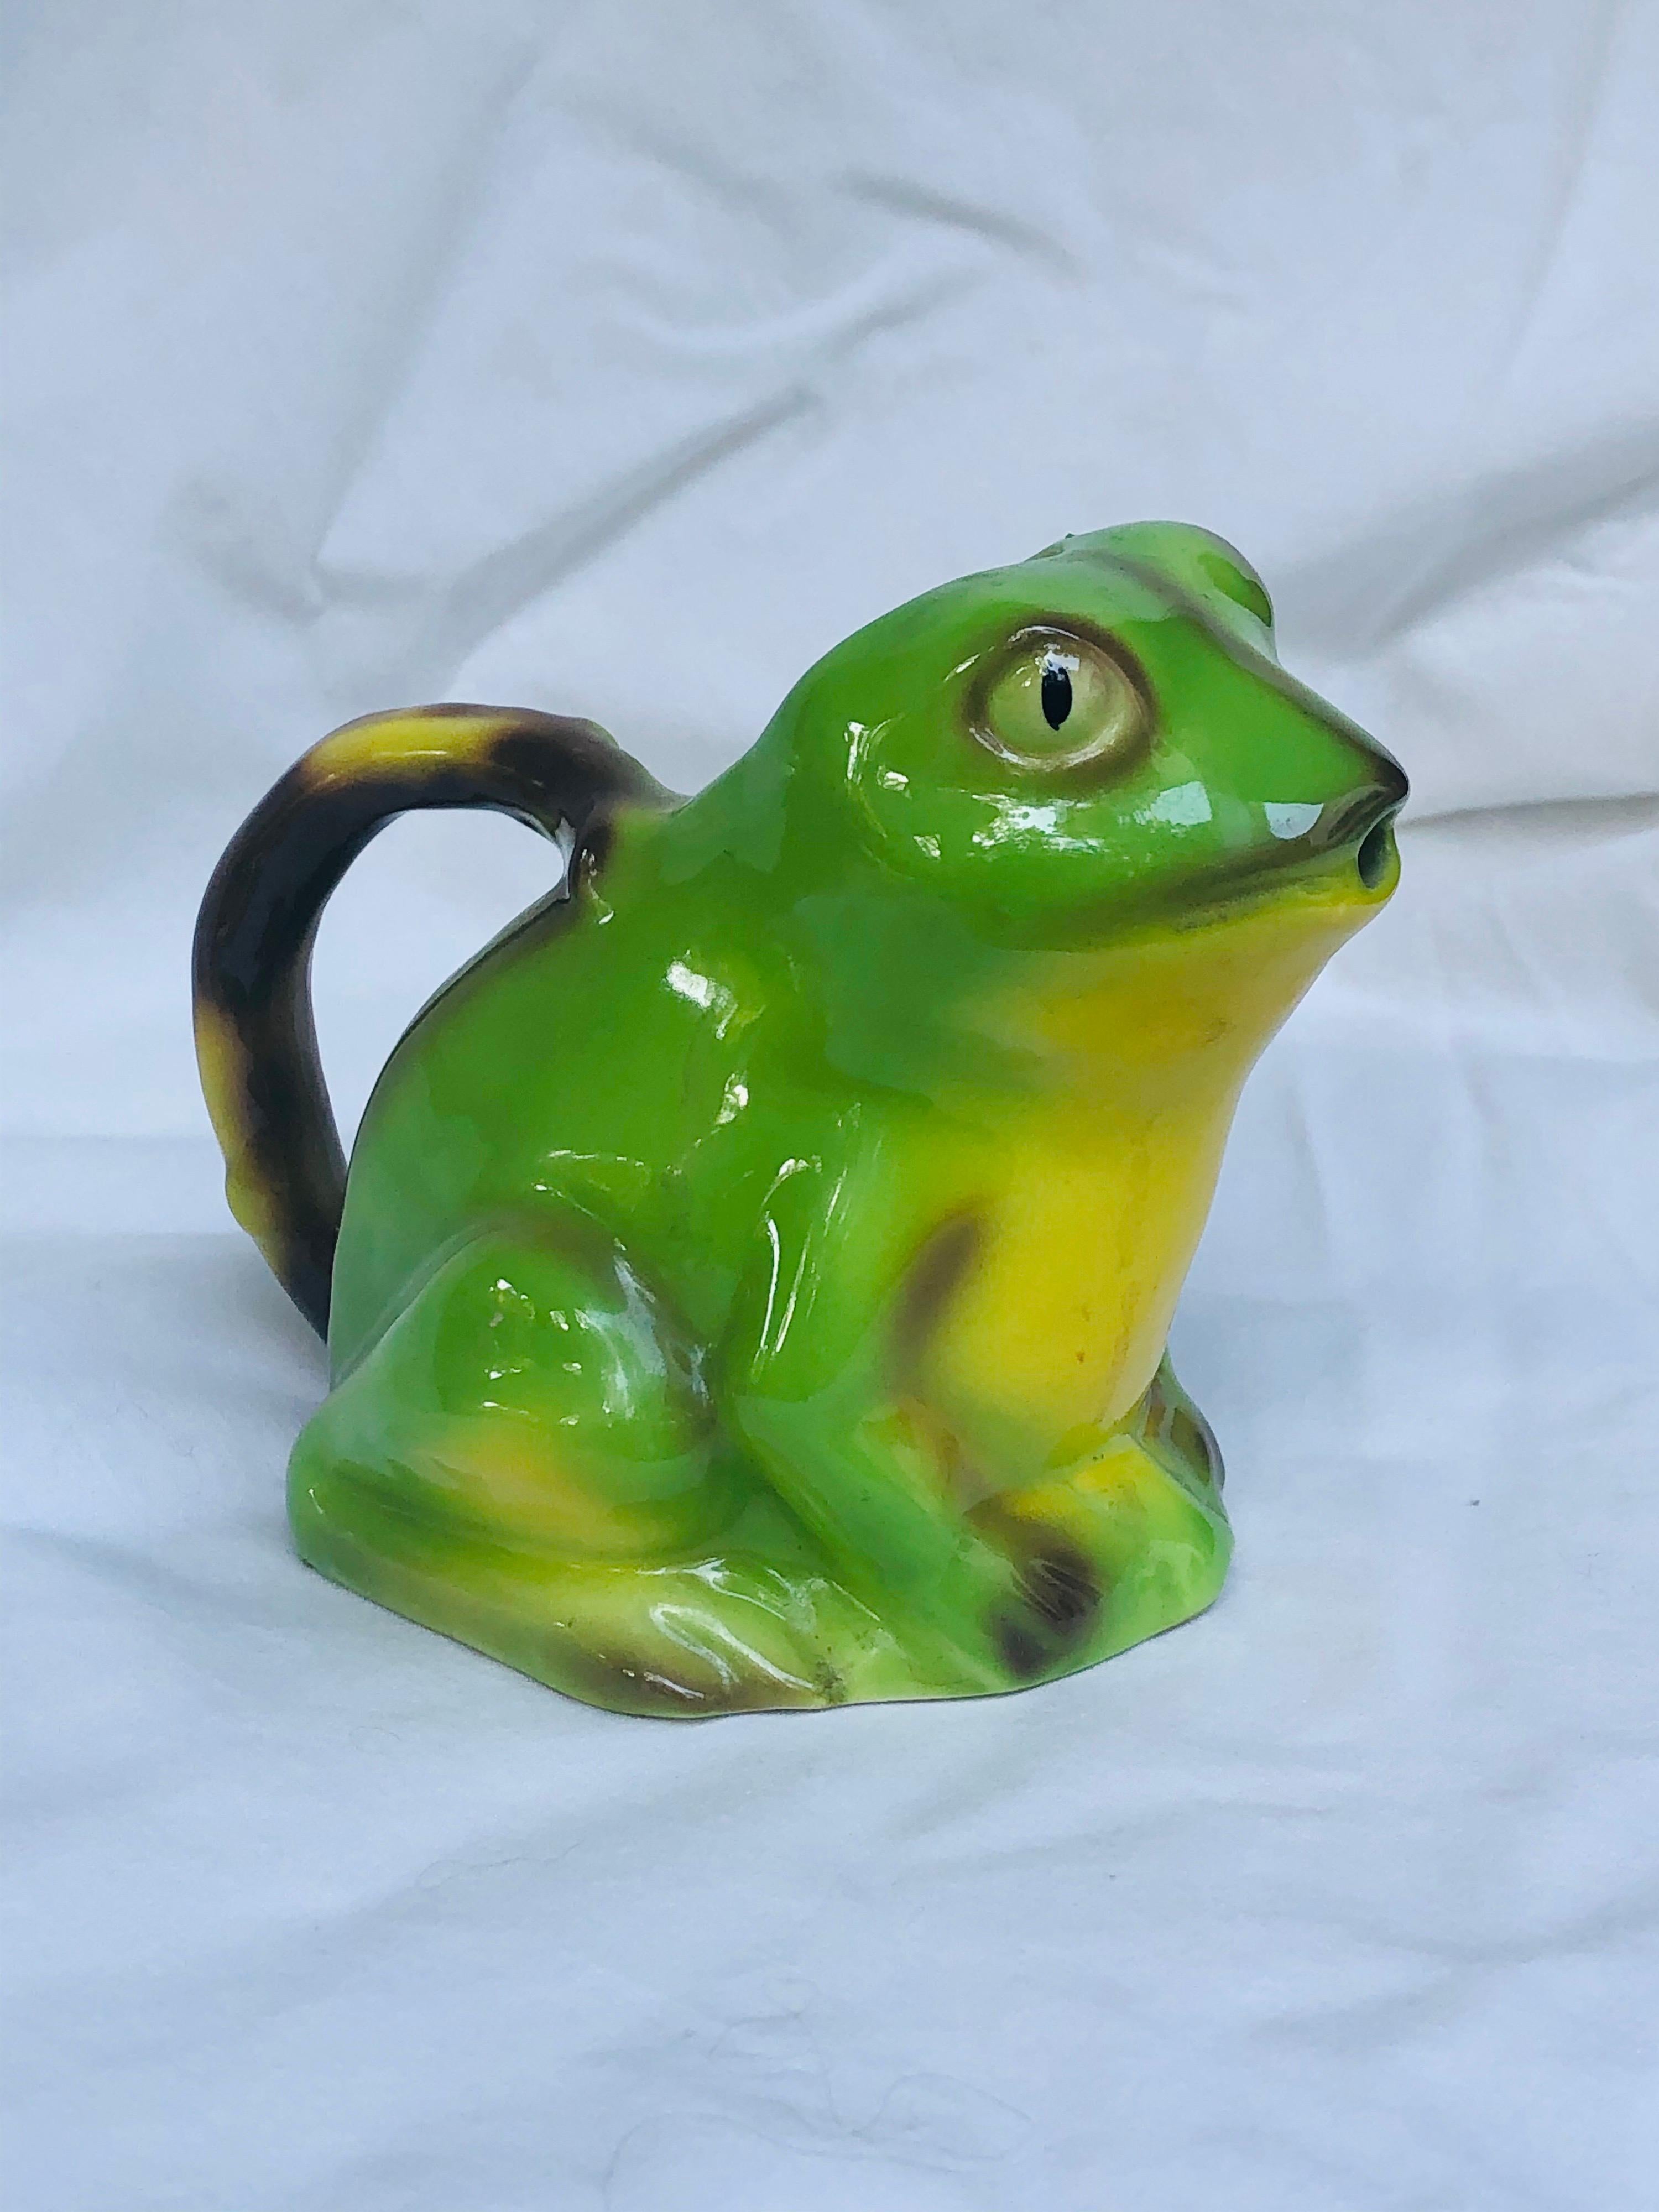 Quite rare Tony Wood green pottery frog creamer, circa 1982. England. Signed on the underside. Wood & Sons studio of Burslem, England, were known for their Toby Jugs and have been circa 1865. They have ceased production.